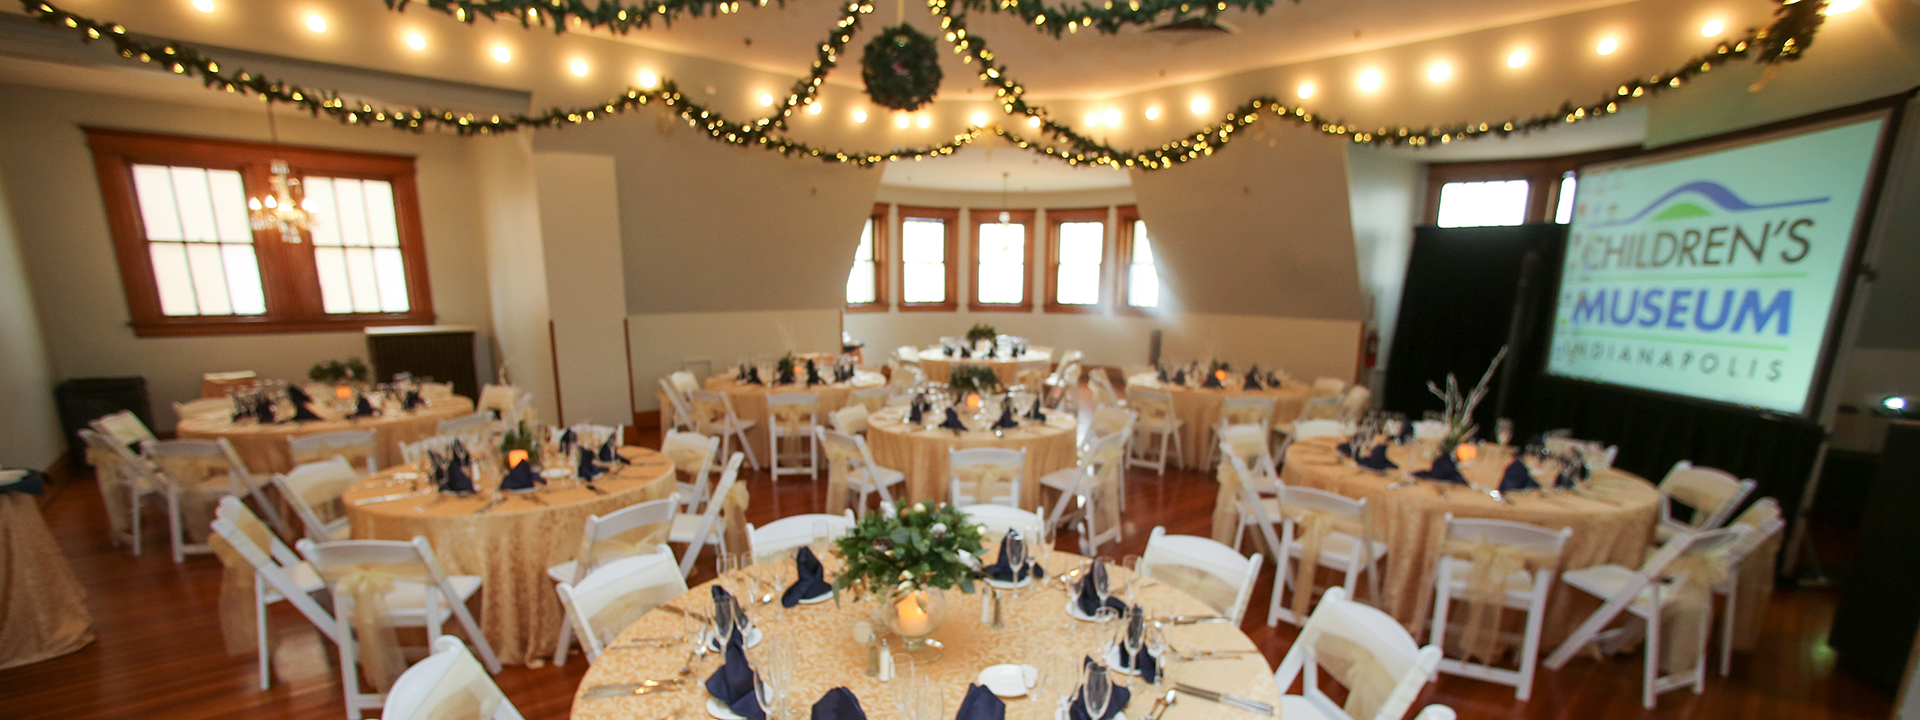 Tables with holiday decorations set up in the Manor